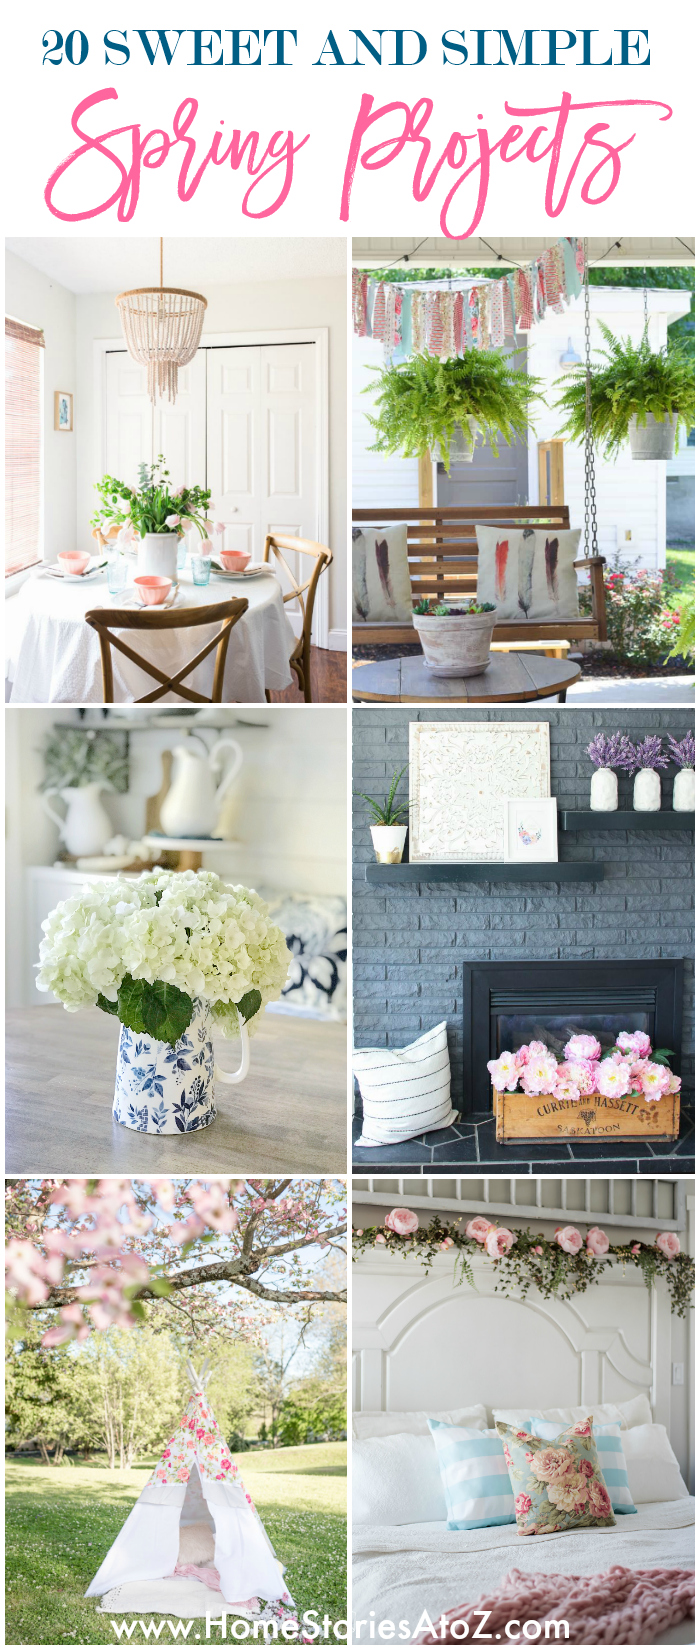 20 Sweet and Simple Spring Projects - Home Stories A to Z